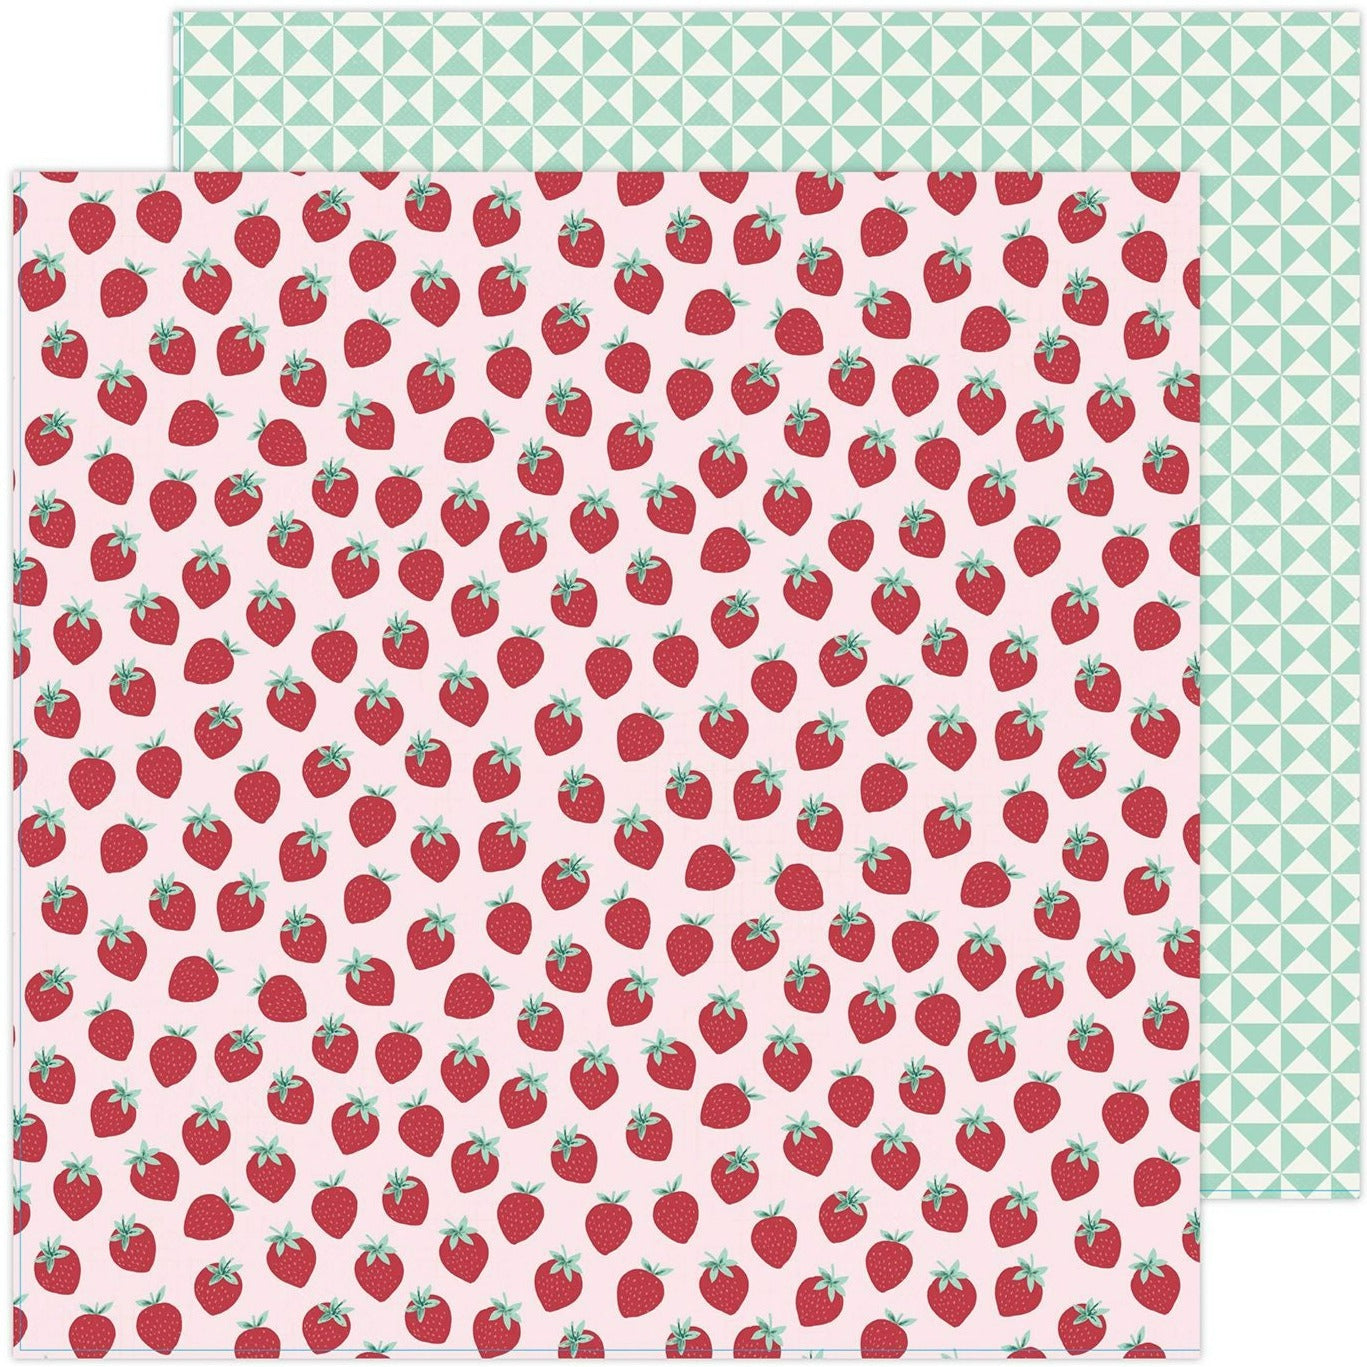 12x12 patterned paper (Side A - red strawberries with green leaves on a pink background, Side B - mint green and white star quilt pattern) - from Maggie Holmes